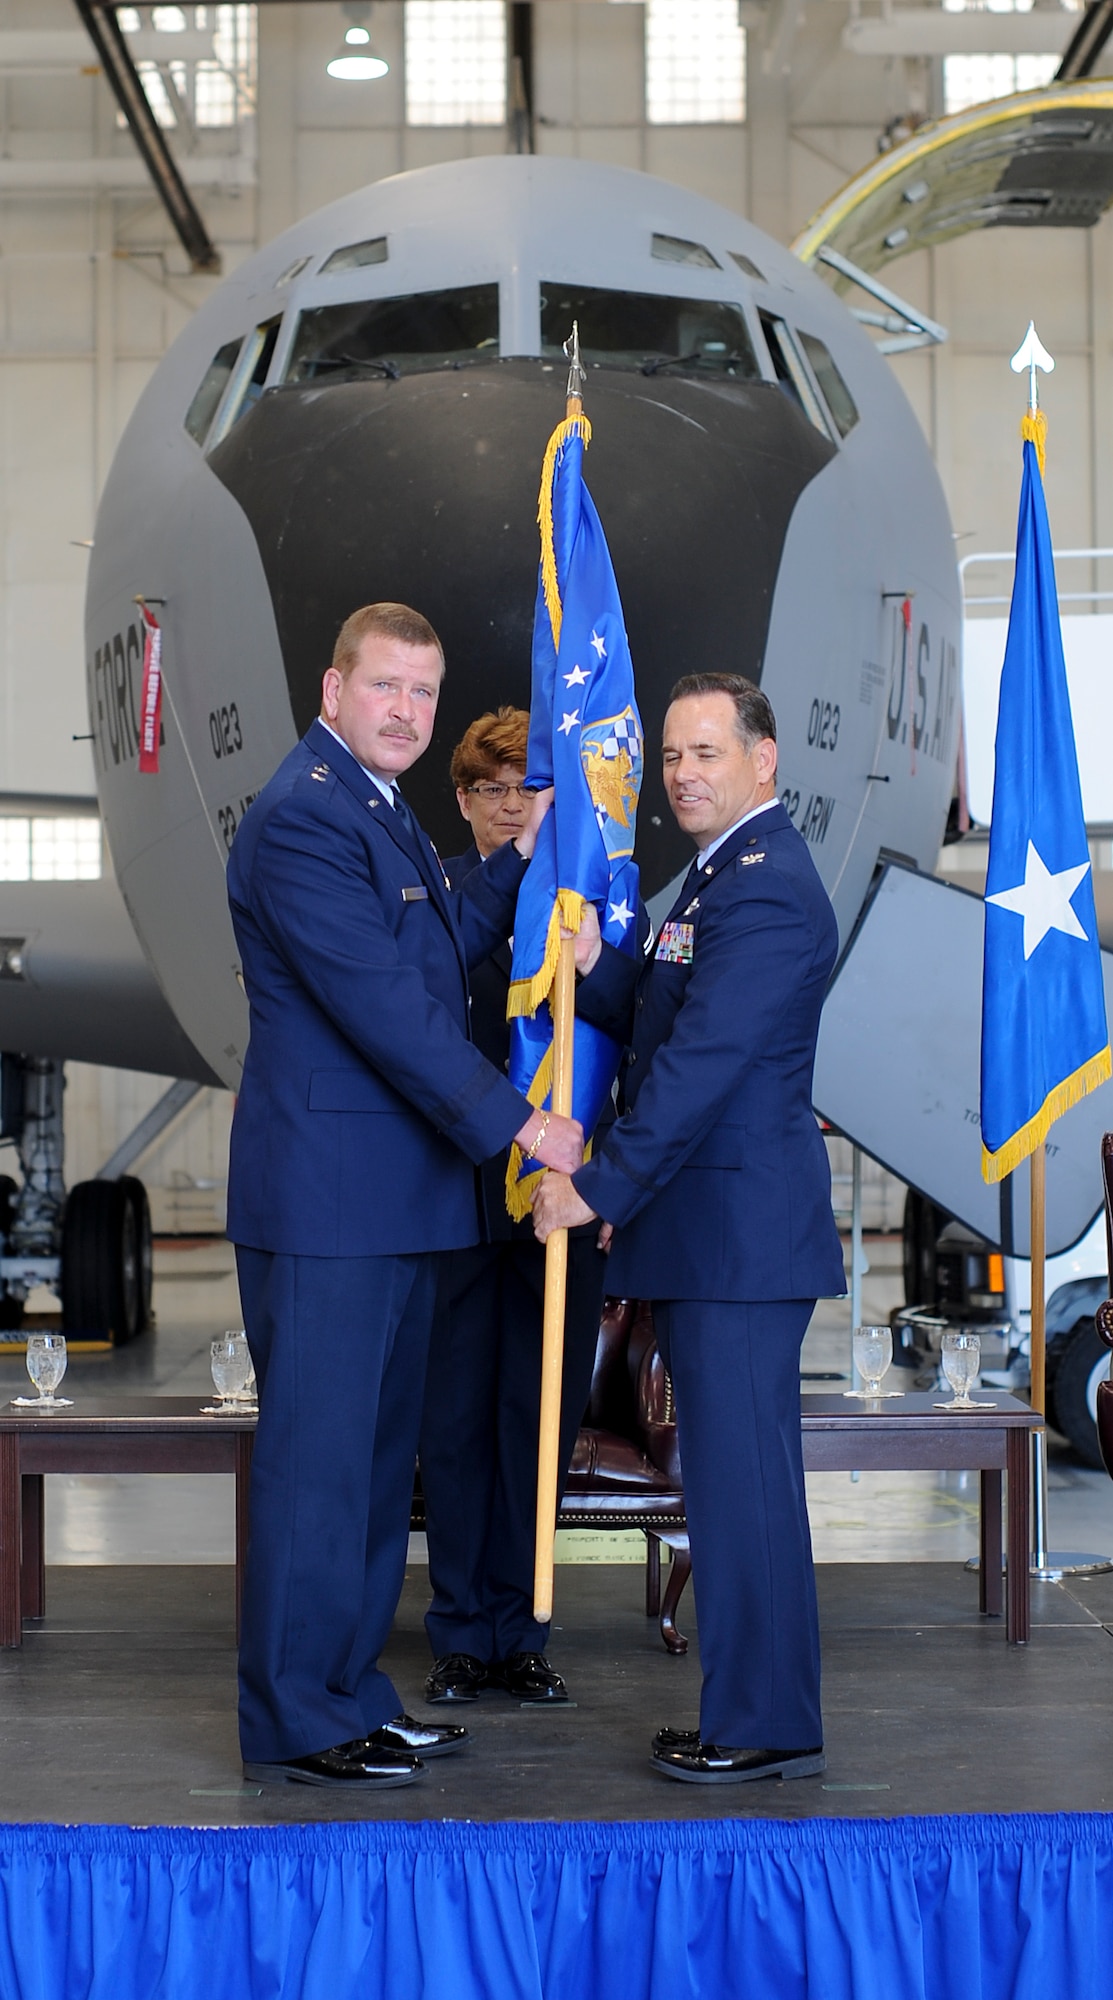 Maj. Gen. Mark A. Kyle, 4th Air Force, Air Force Reserve commander, passes the 931st Air Refueling Group flag to Col. Mark S. Larson, 931st ARG commander, during a change of command ceremony August 4, 2012, McConnell Air Force Base, Kan. (U.S. Air Force photo/Airman 1st Class Jose L. Leon)
